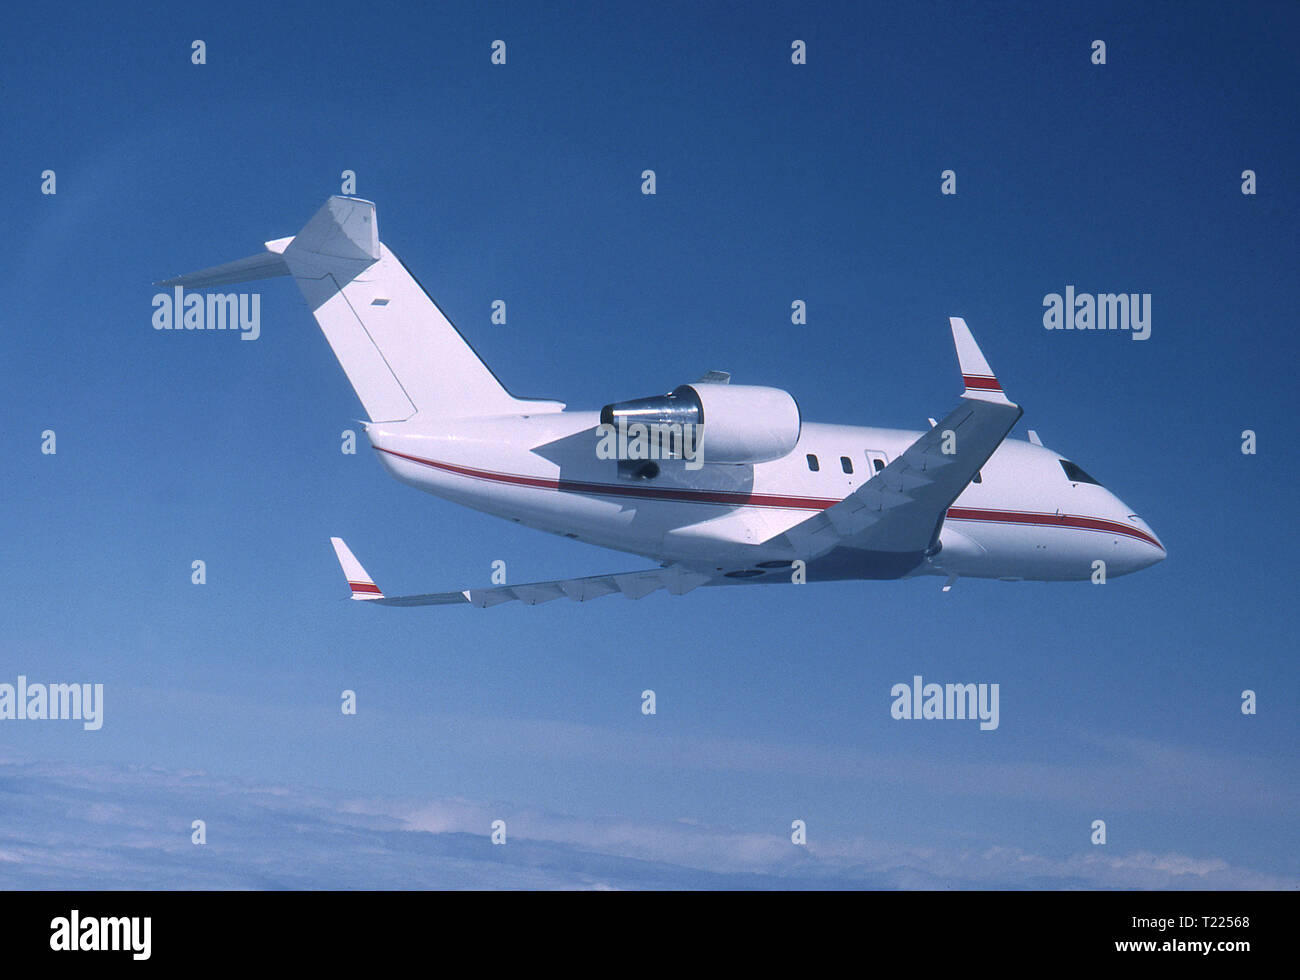 Canadair Challenger Corporate Jets Stock Photo